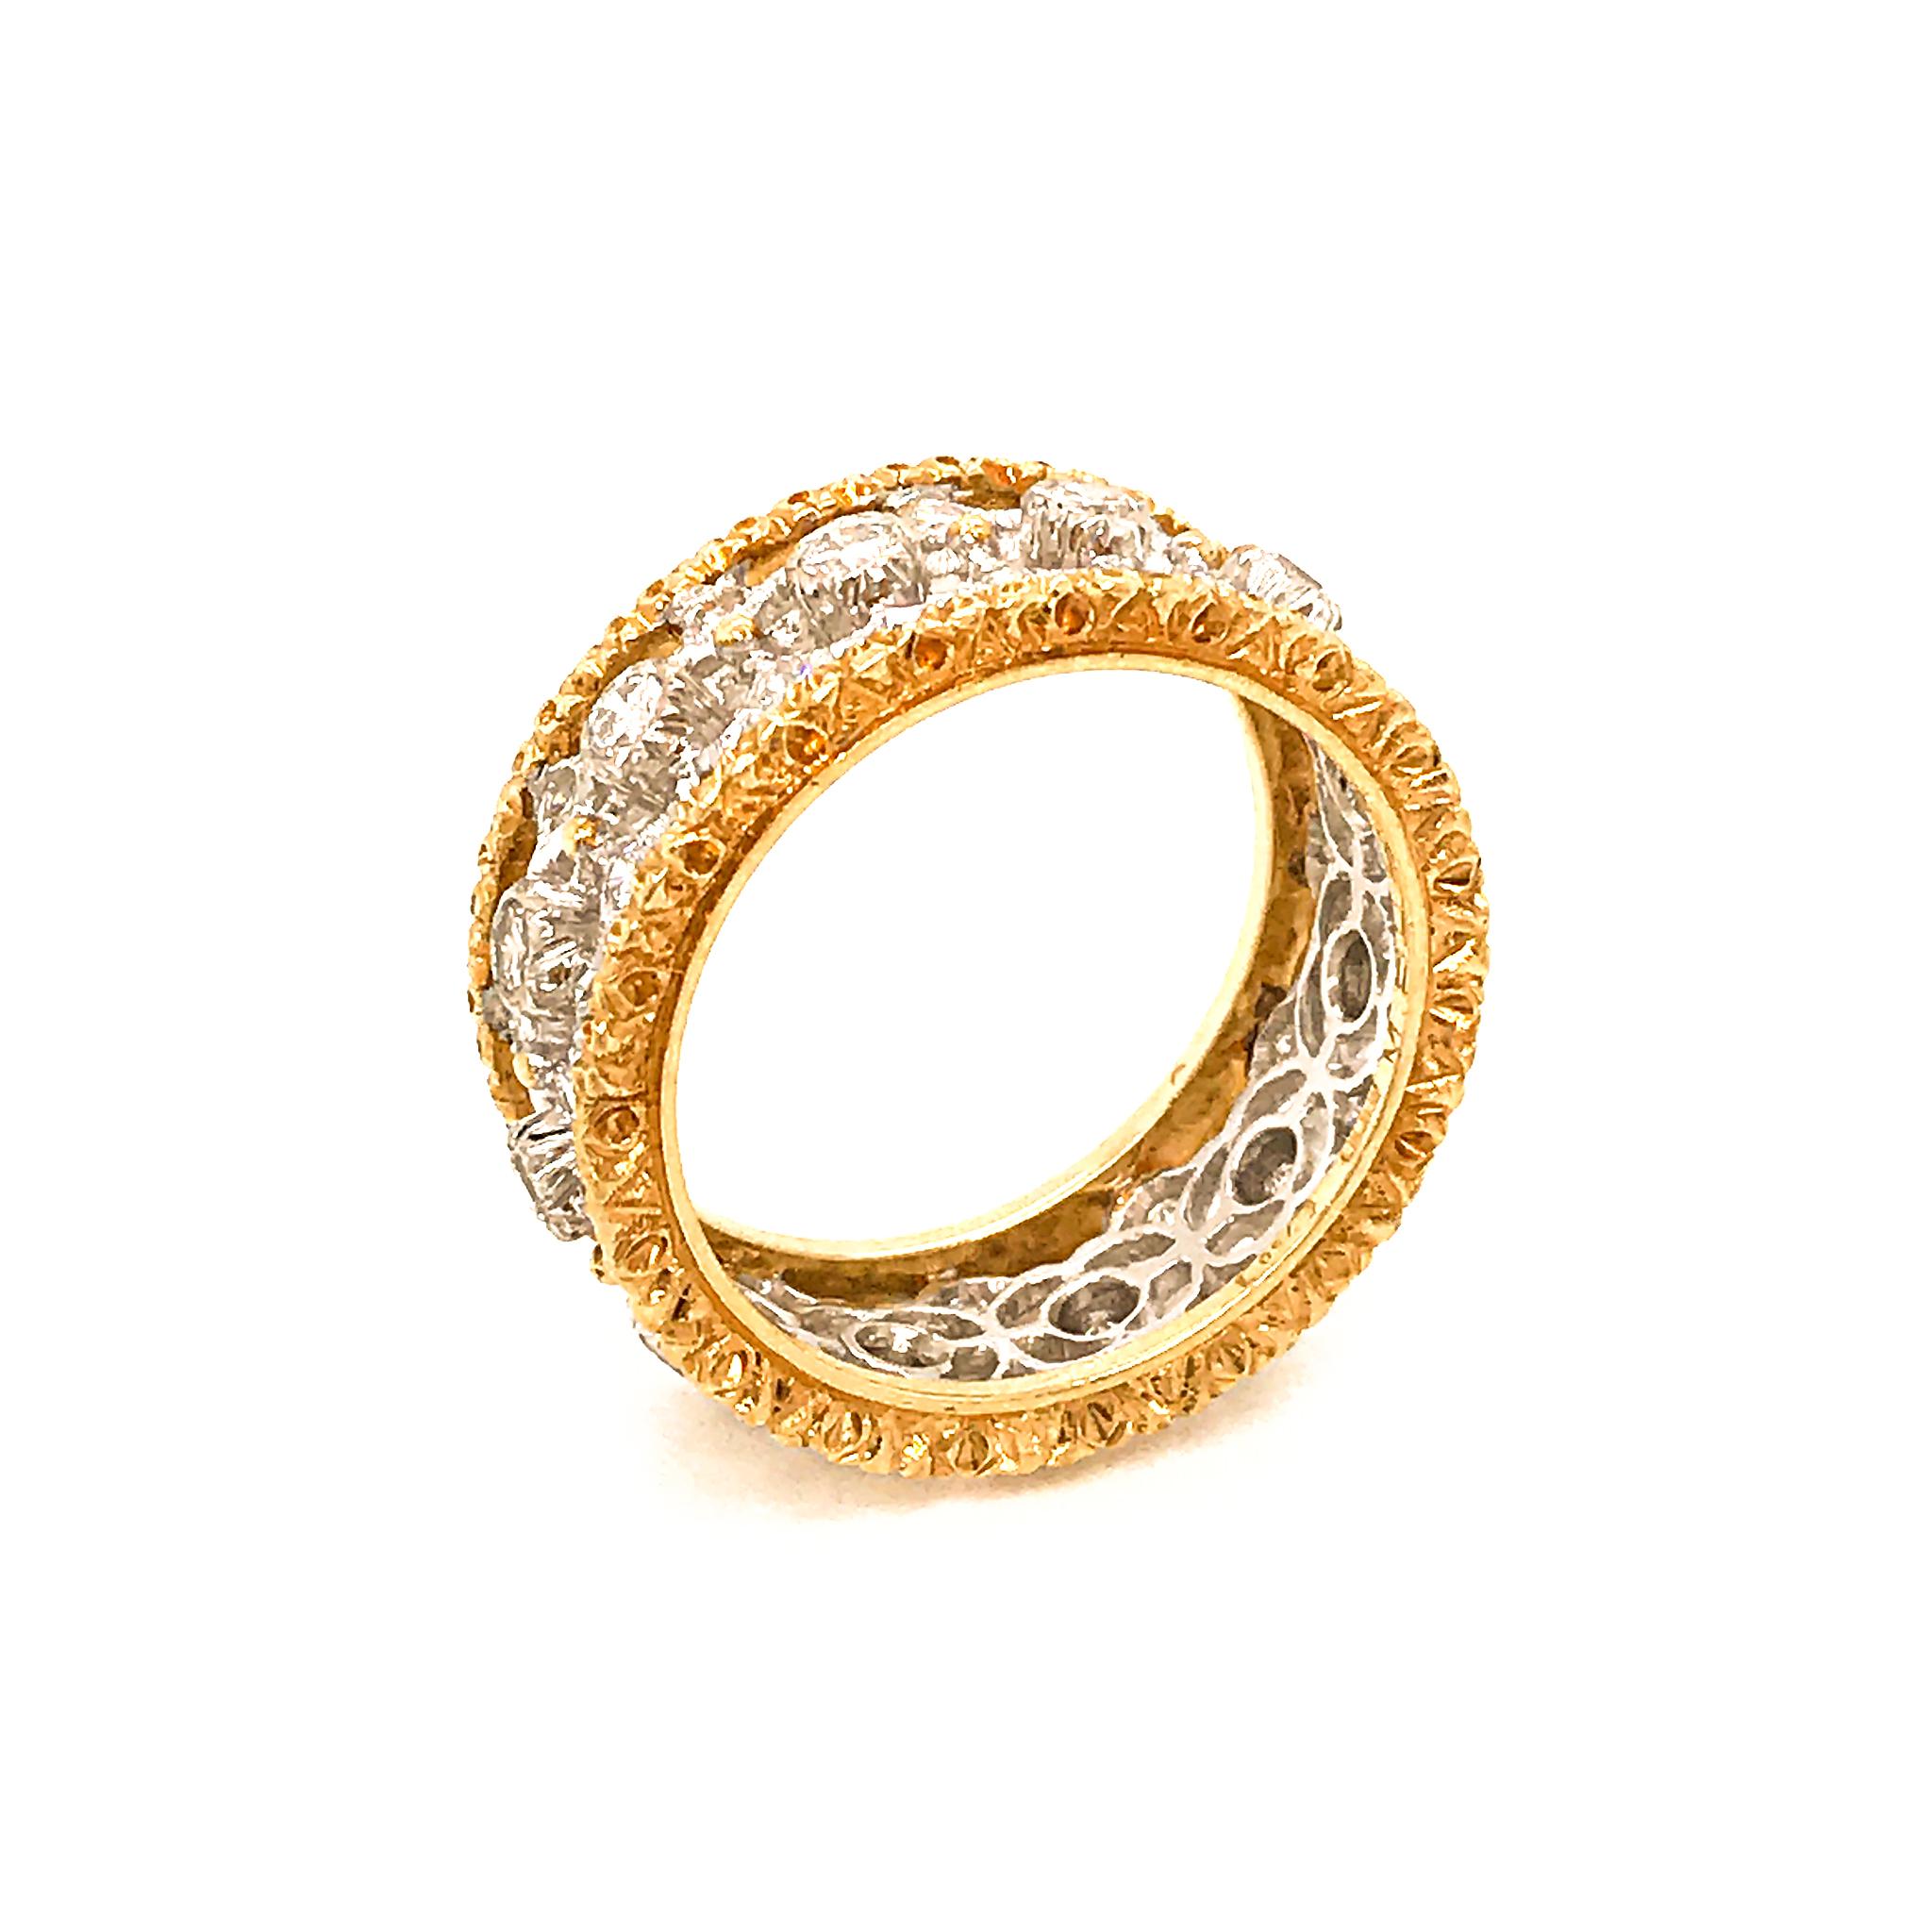 METAL TYPE: 18k Yellow and White Gold
TOTAL WEIGHT: 6.2 grams
RING SIZE: 7